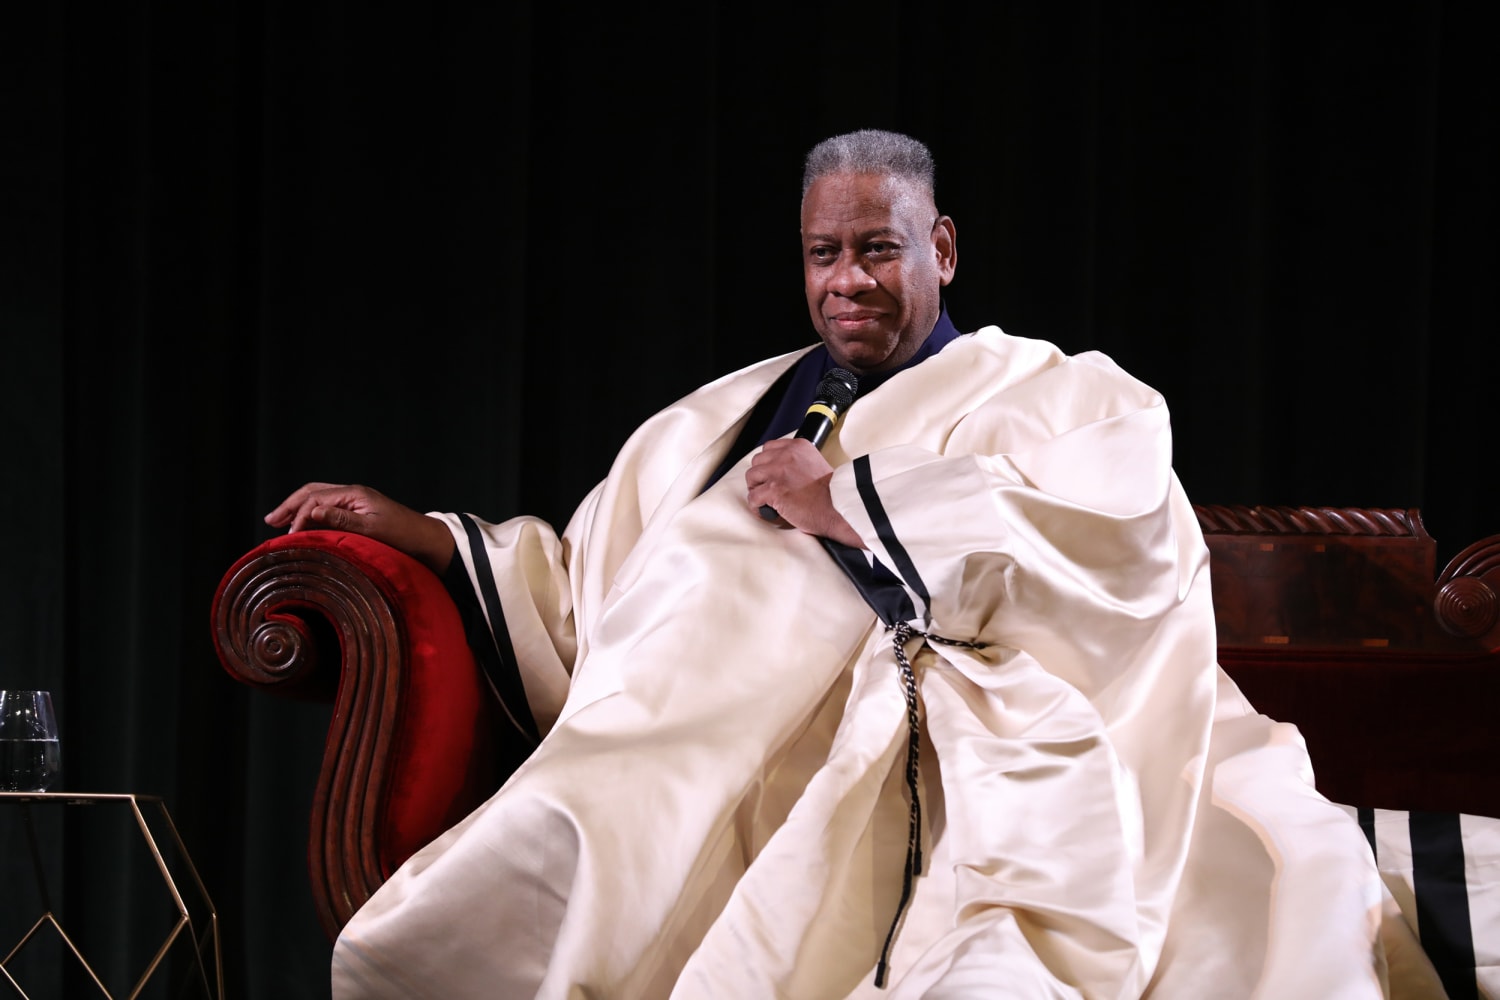 André Leon Talley finds enslaved ancestors in 'Finding Your Roots